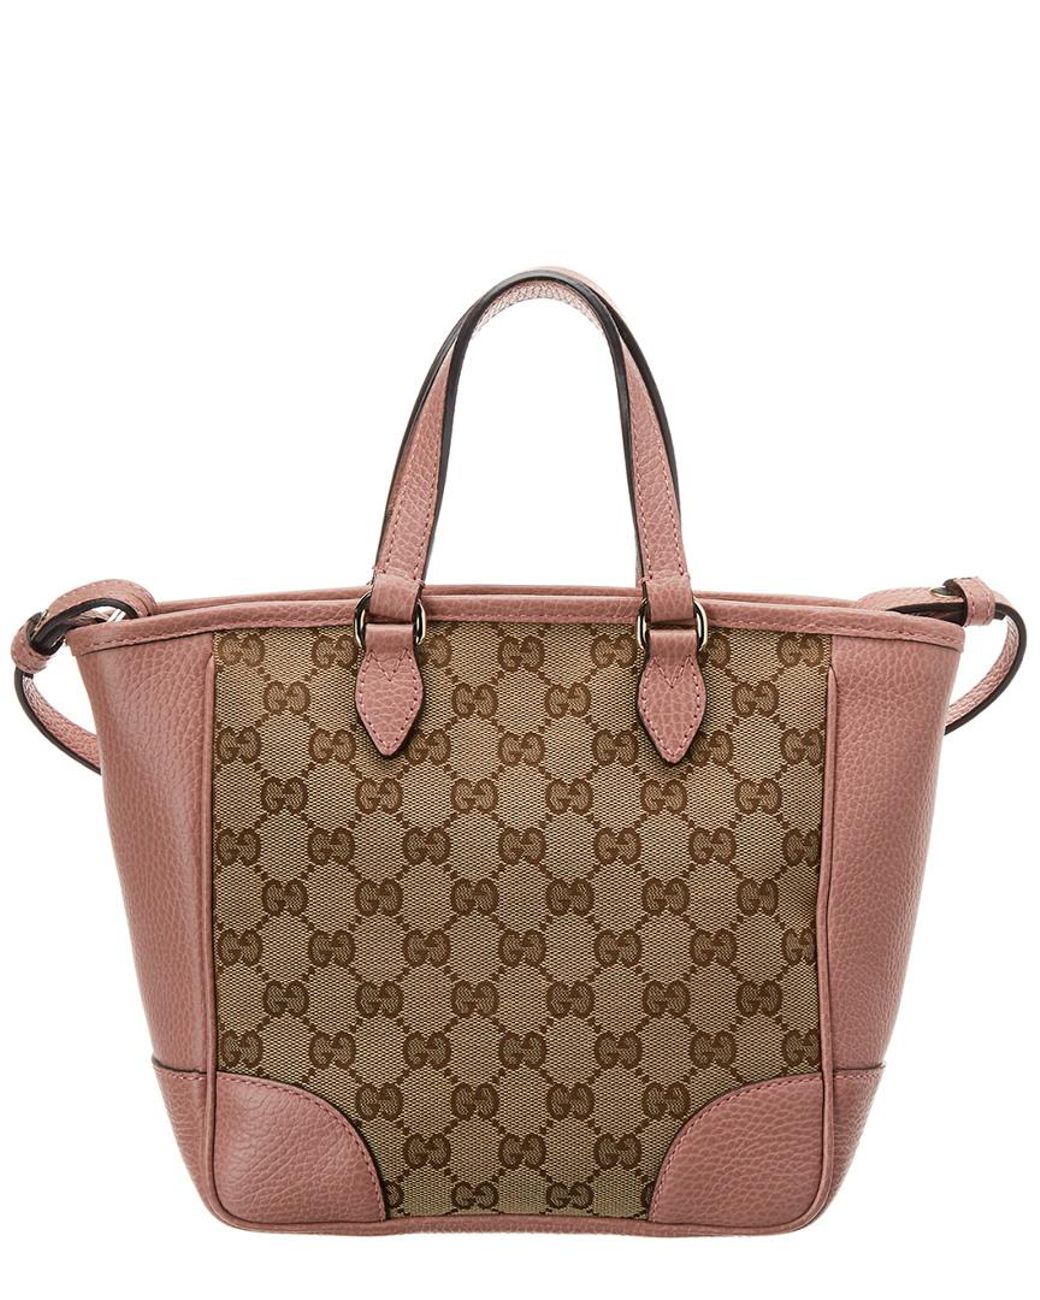 Authentic GUCCI Eclipse Shoulder Tote Bag GG Canvas Leather 140274 Pink :  Brown